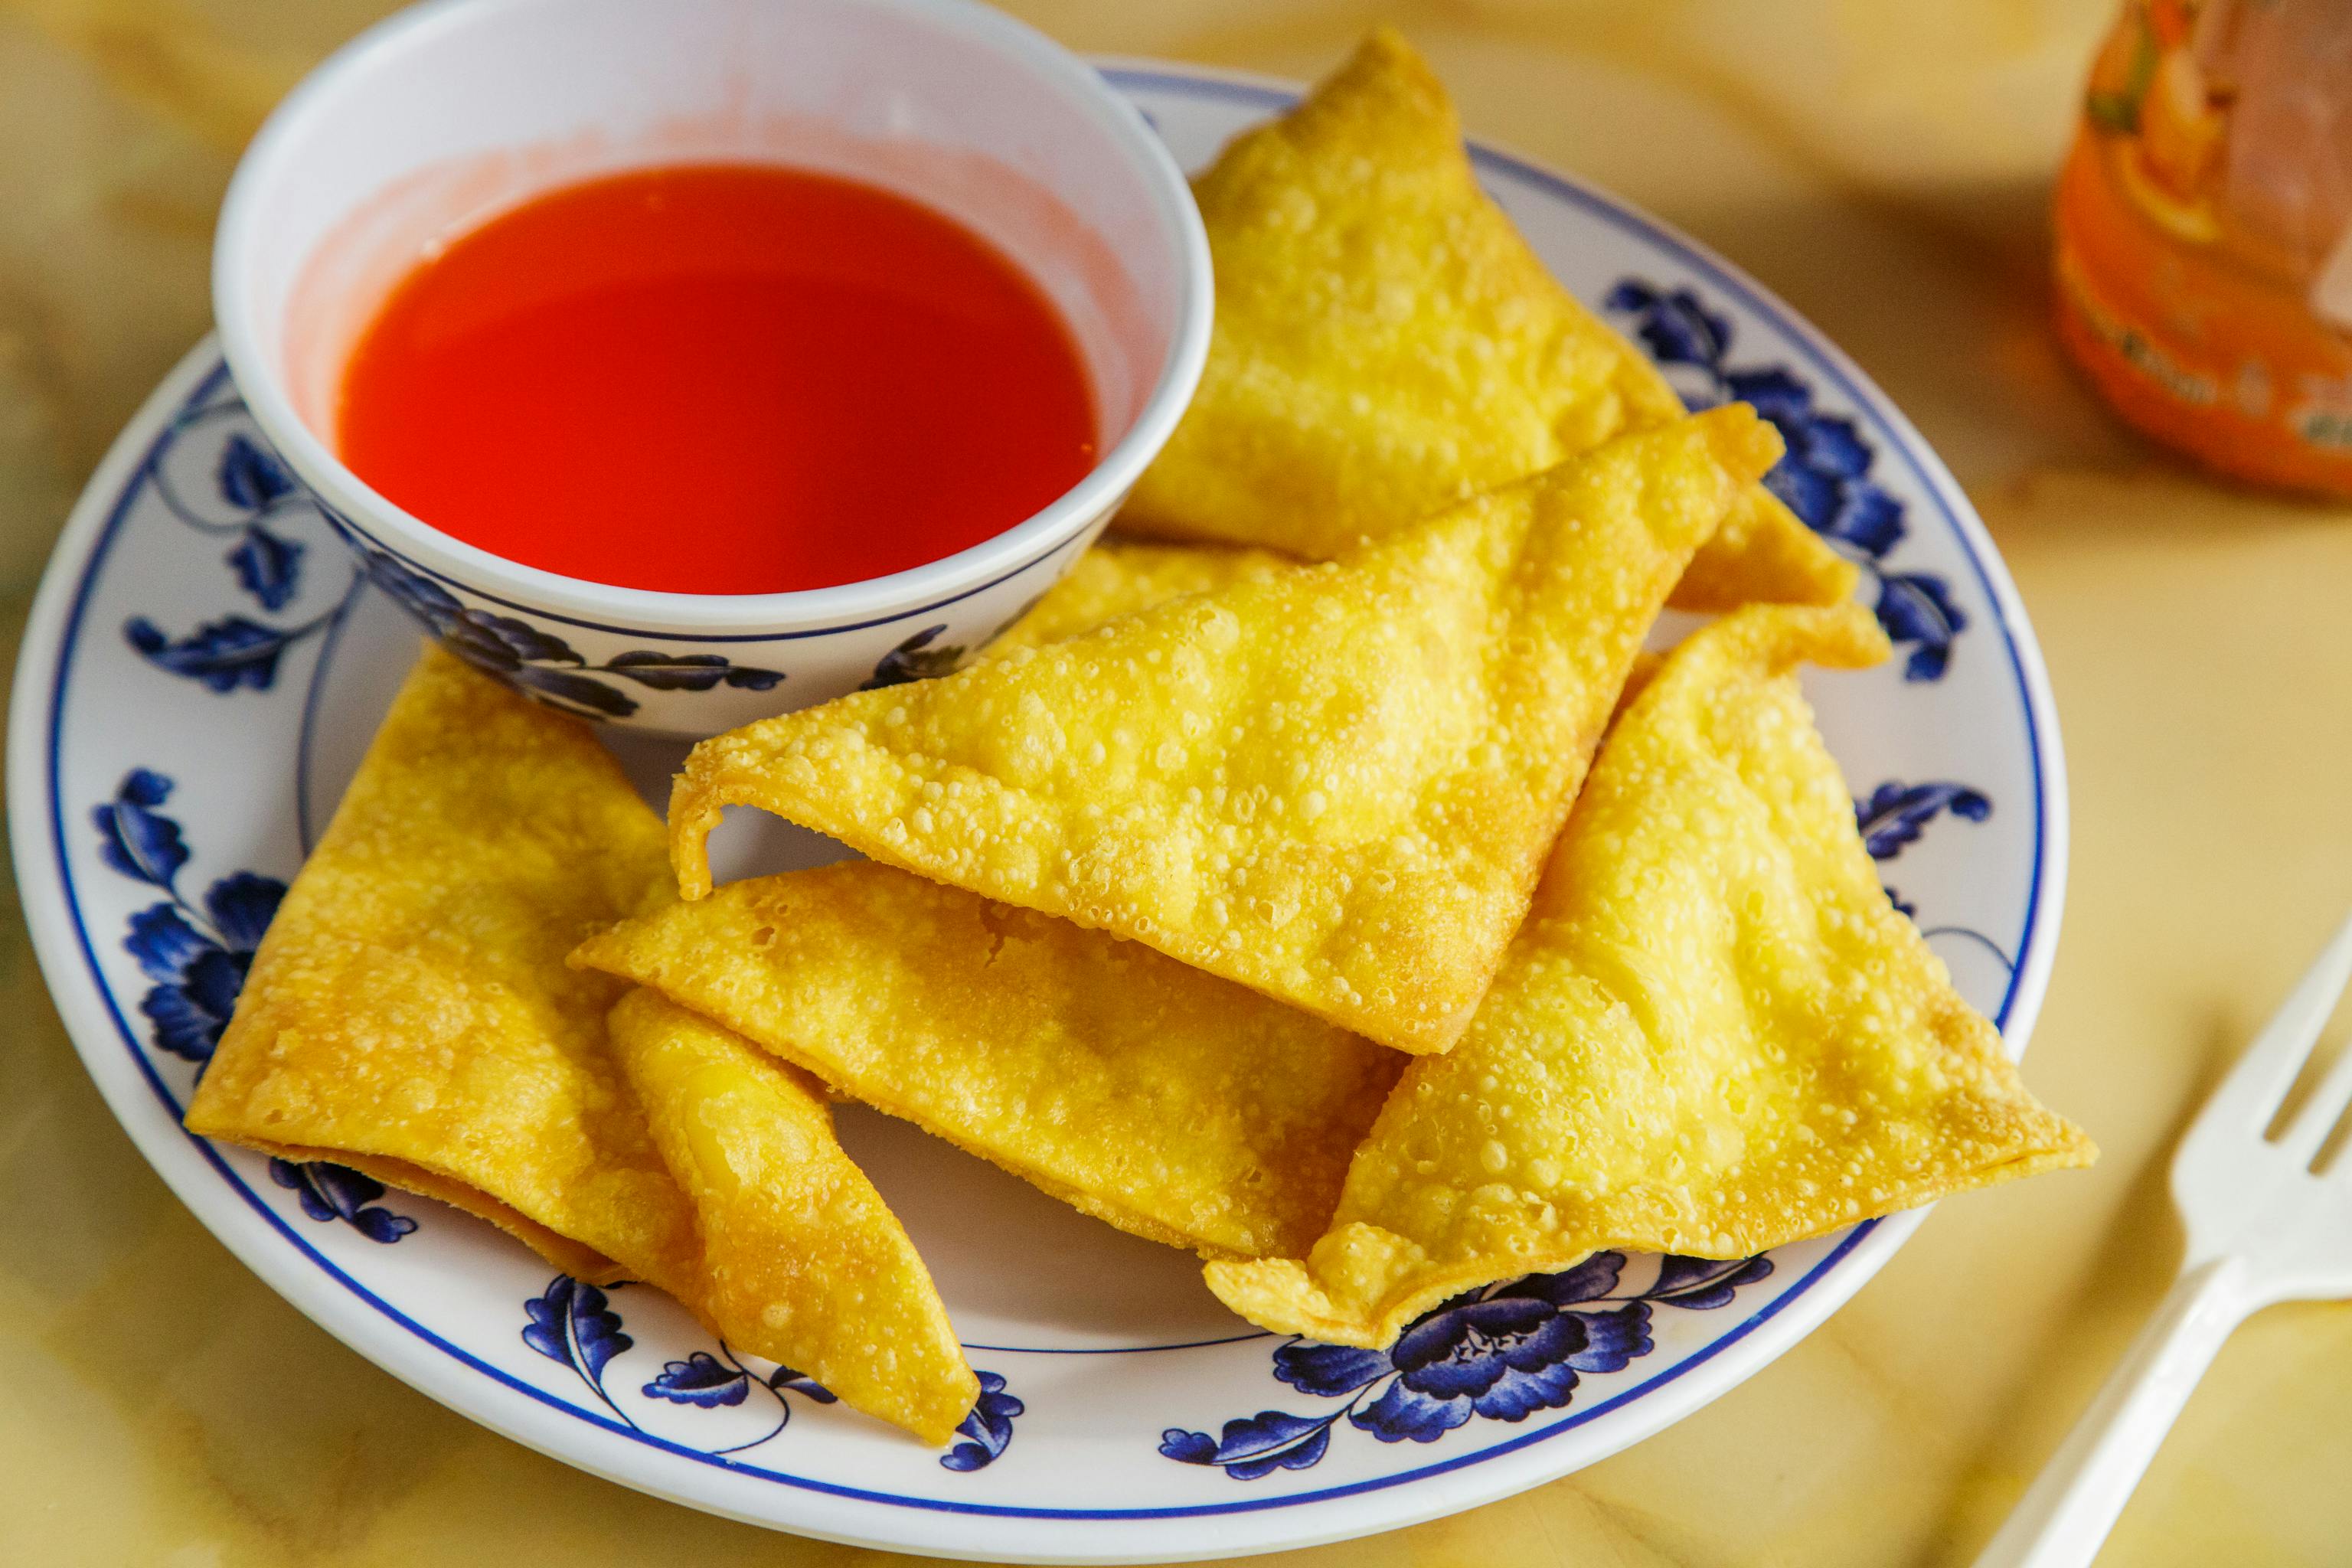 10. Crab Rangoon (6 Pieces) from A8 China in Madison, WI